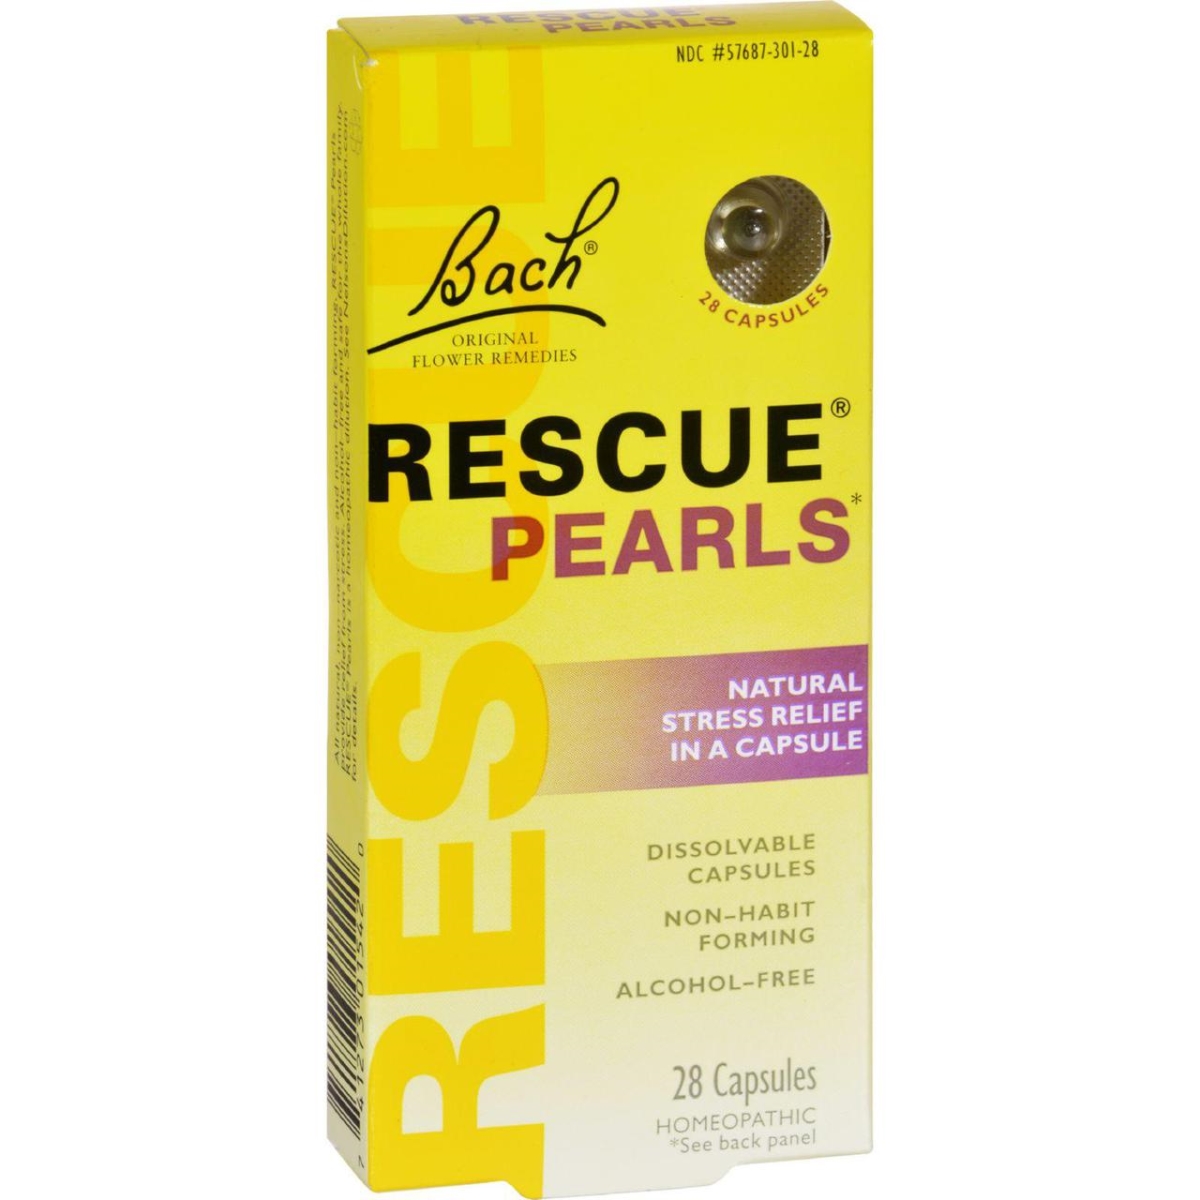 Hg1227347 Rescue Pearls - 28 Count